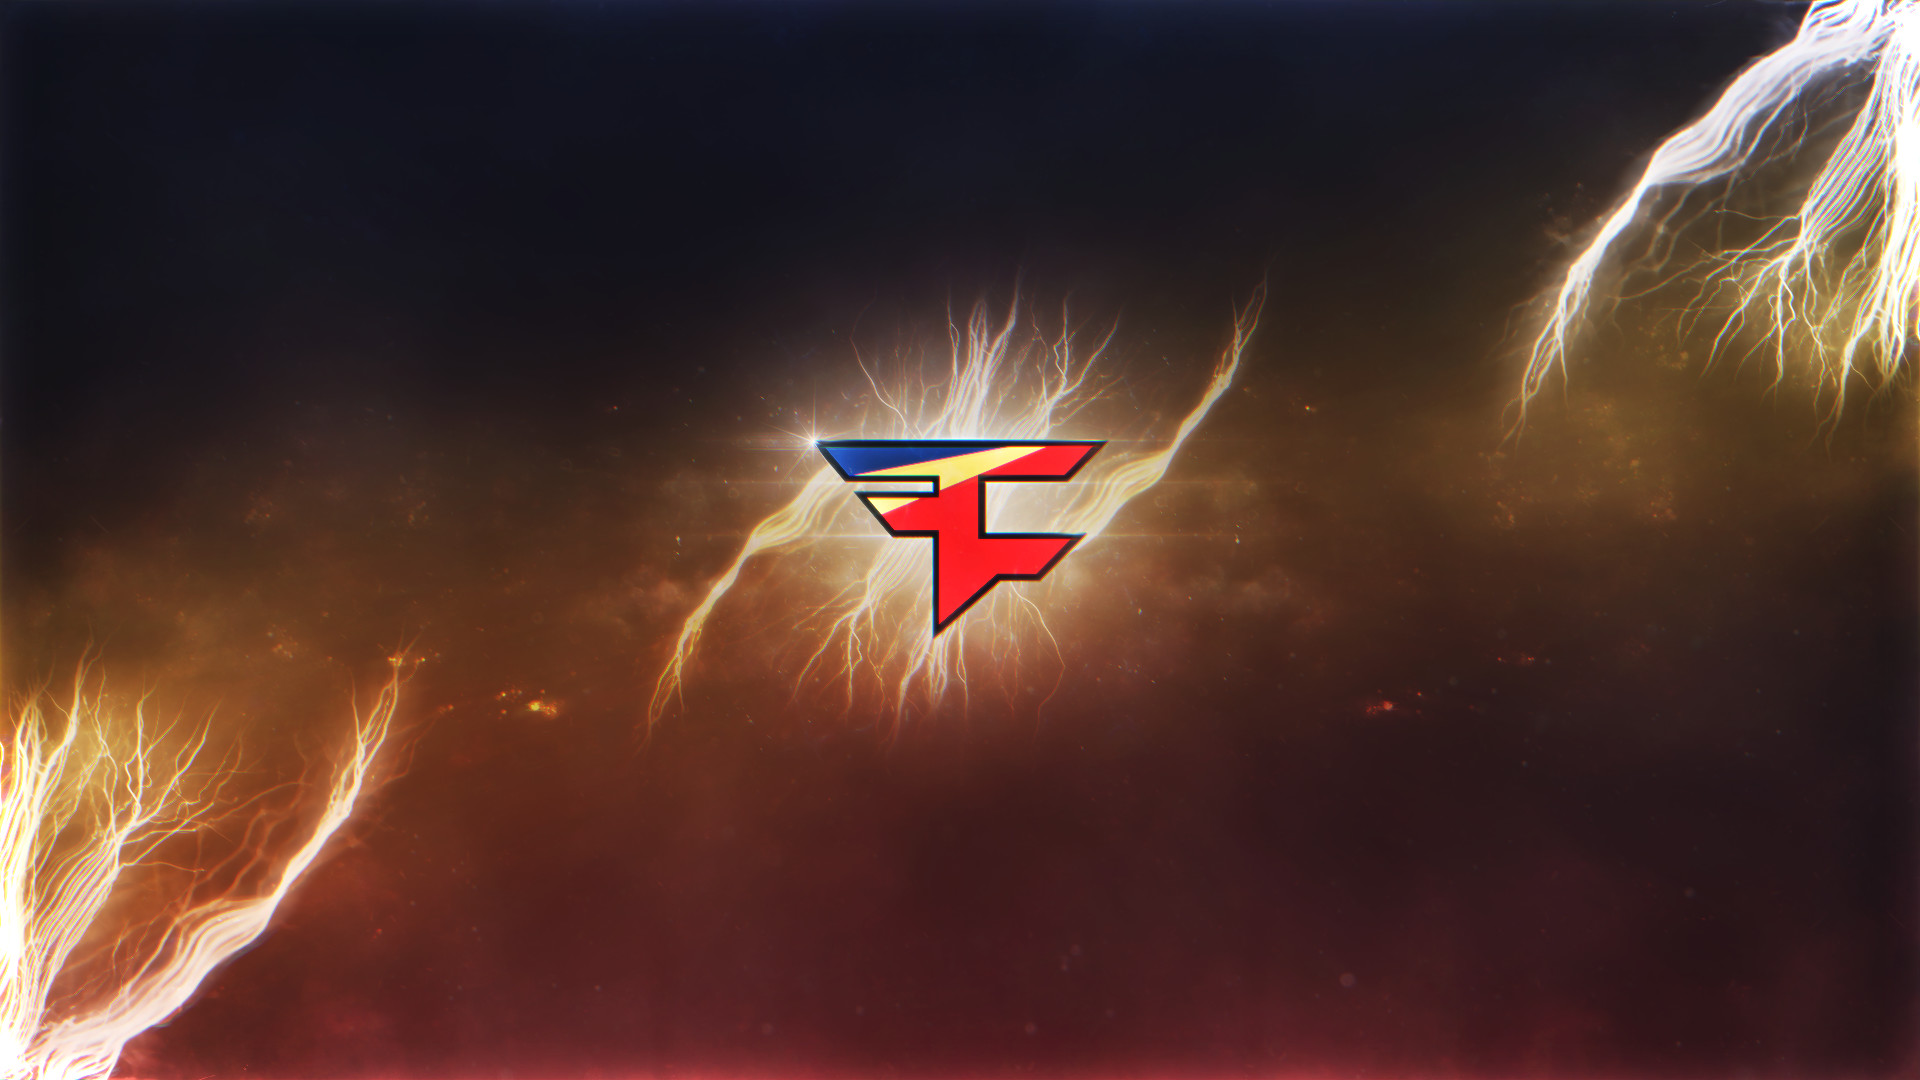 Faze Wallpaper Image Collections Of